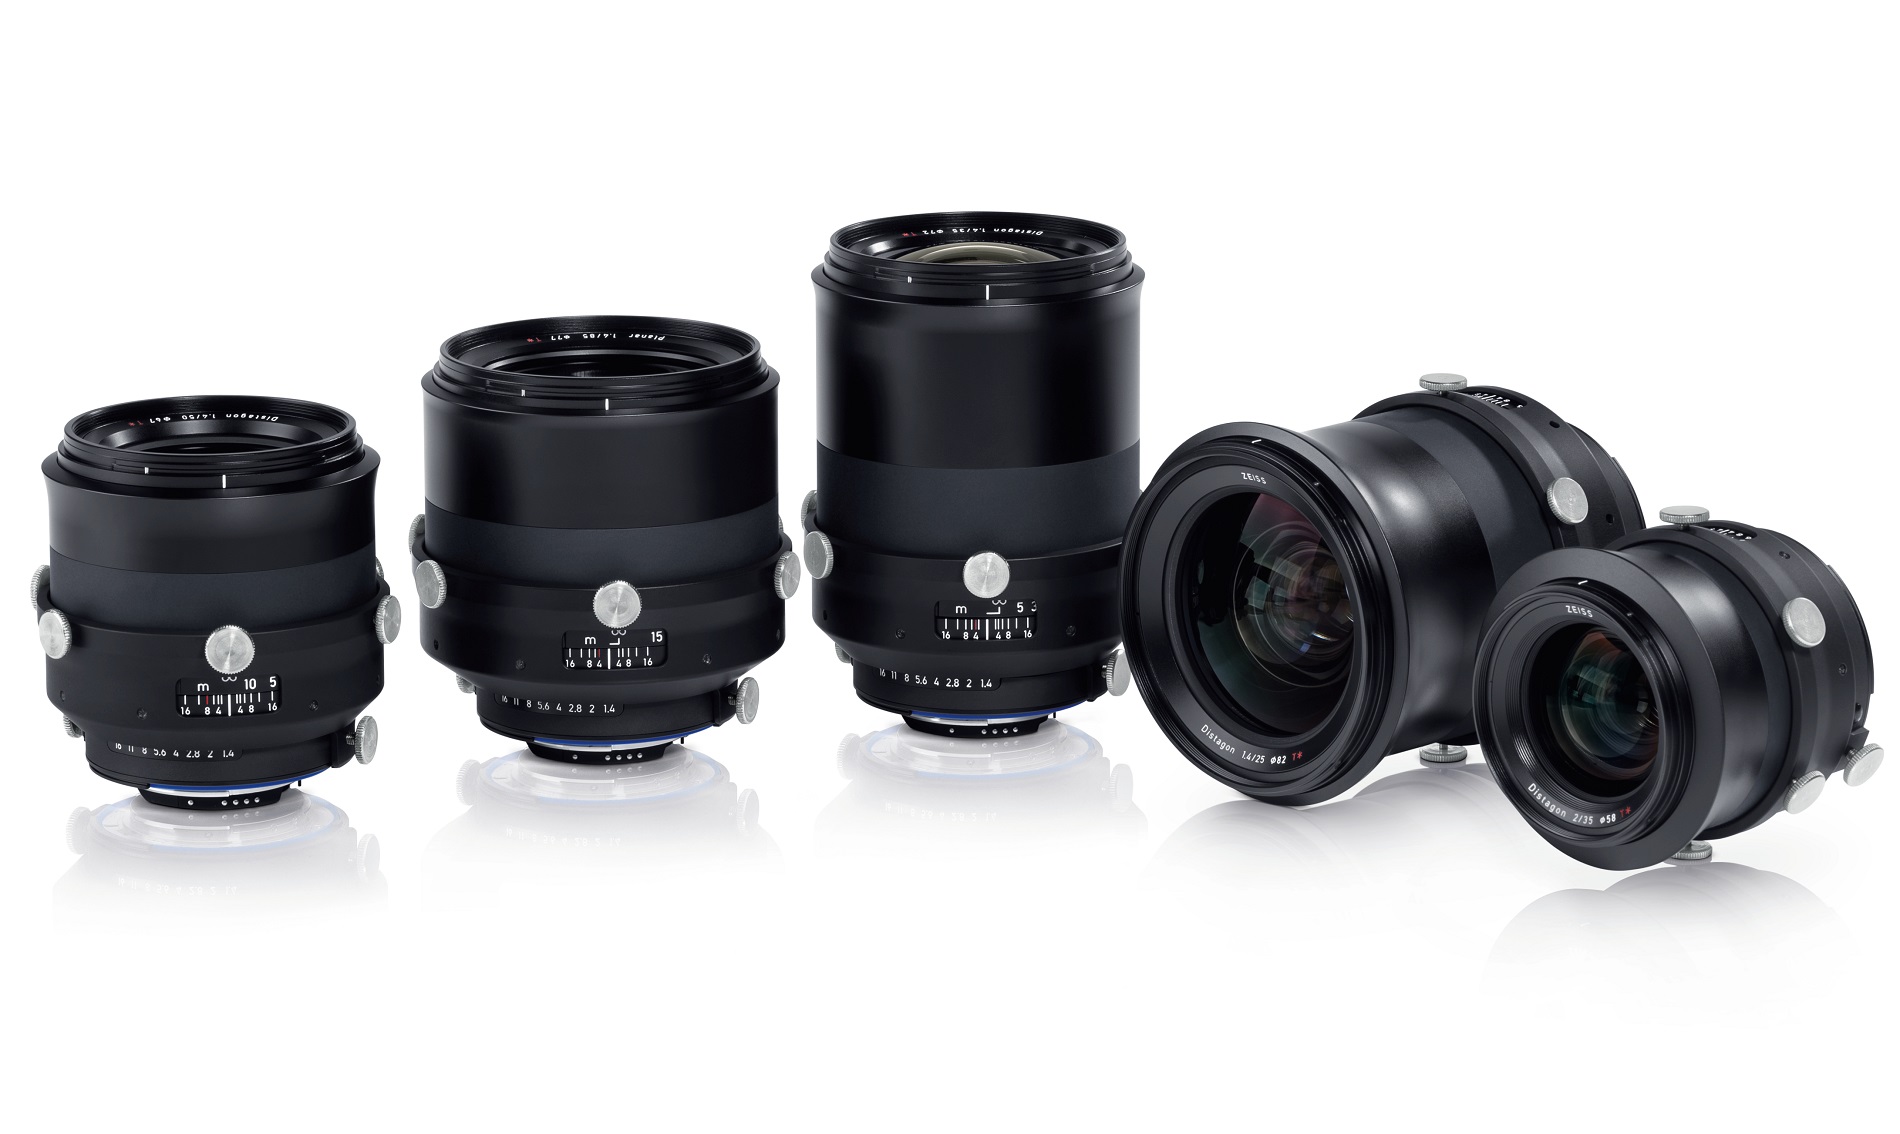 Five new focal lengths for industrial applications